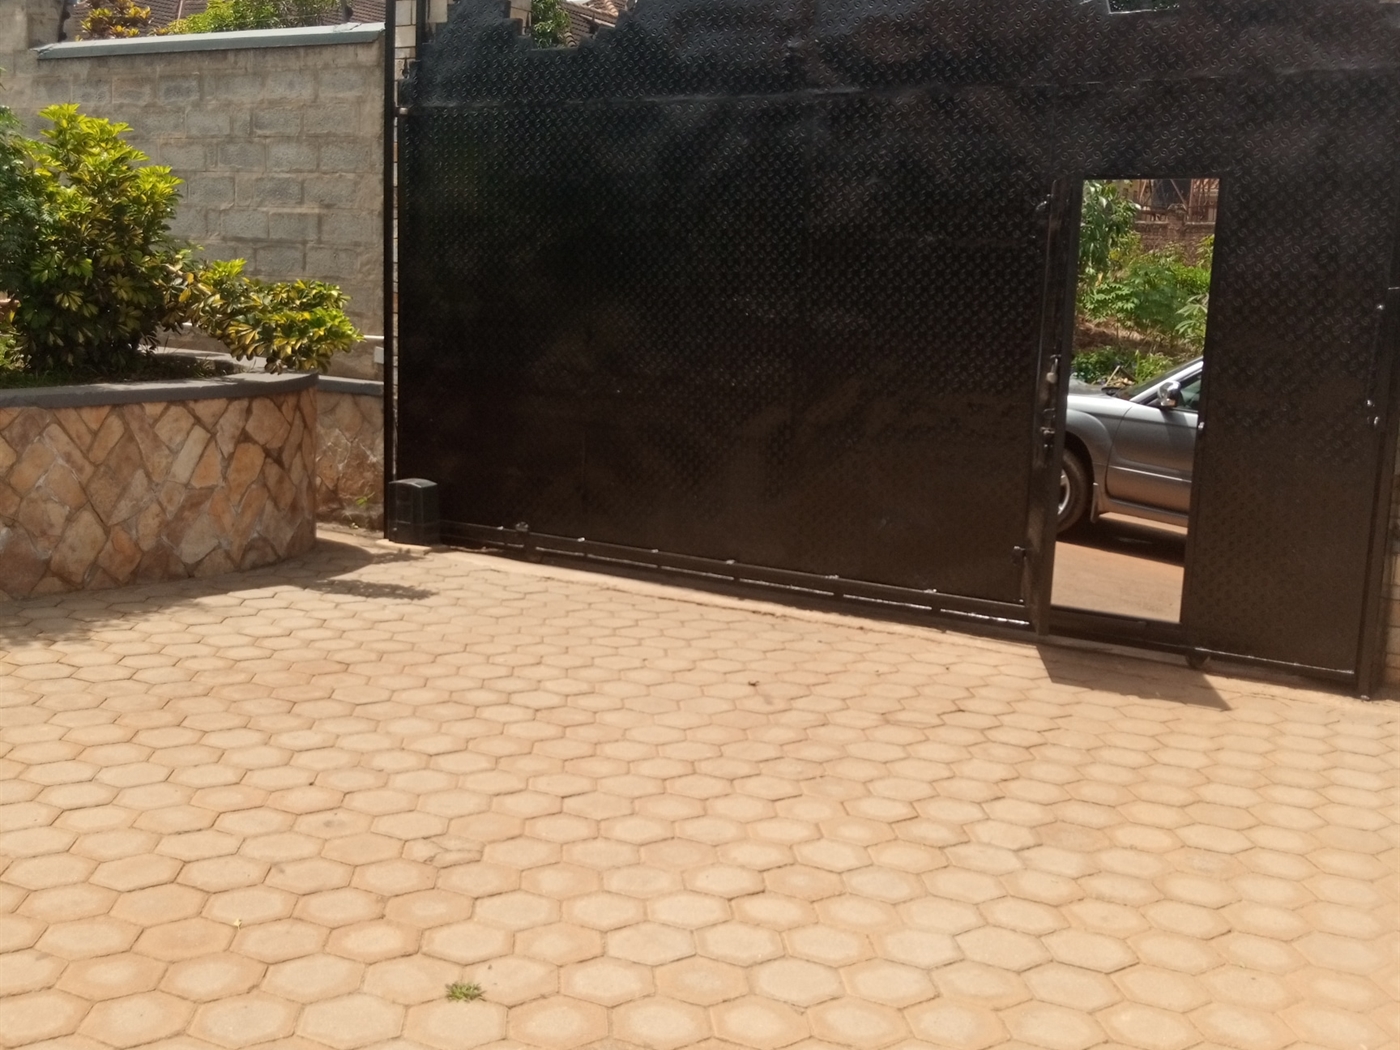 Bungalow for sale in Arkright Wakiso